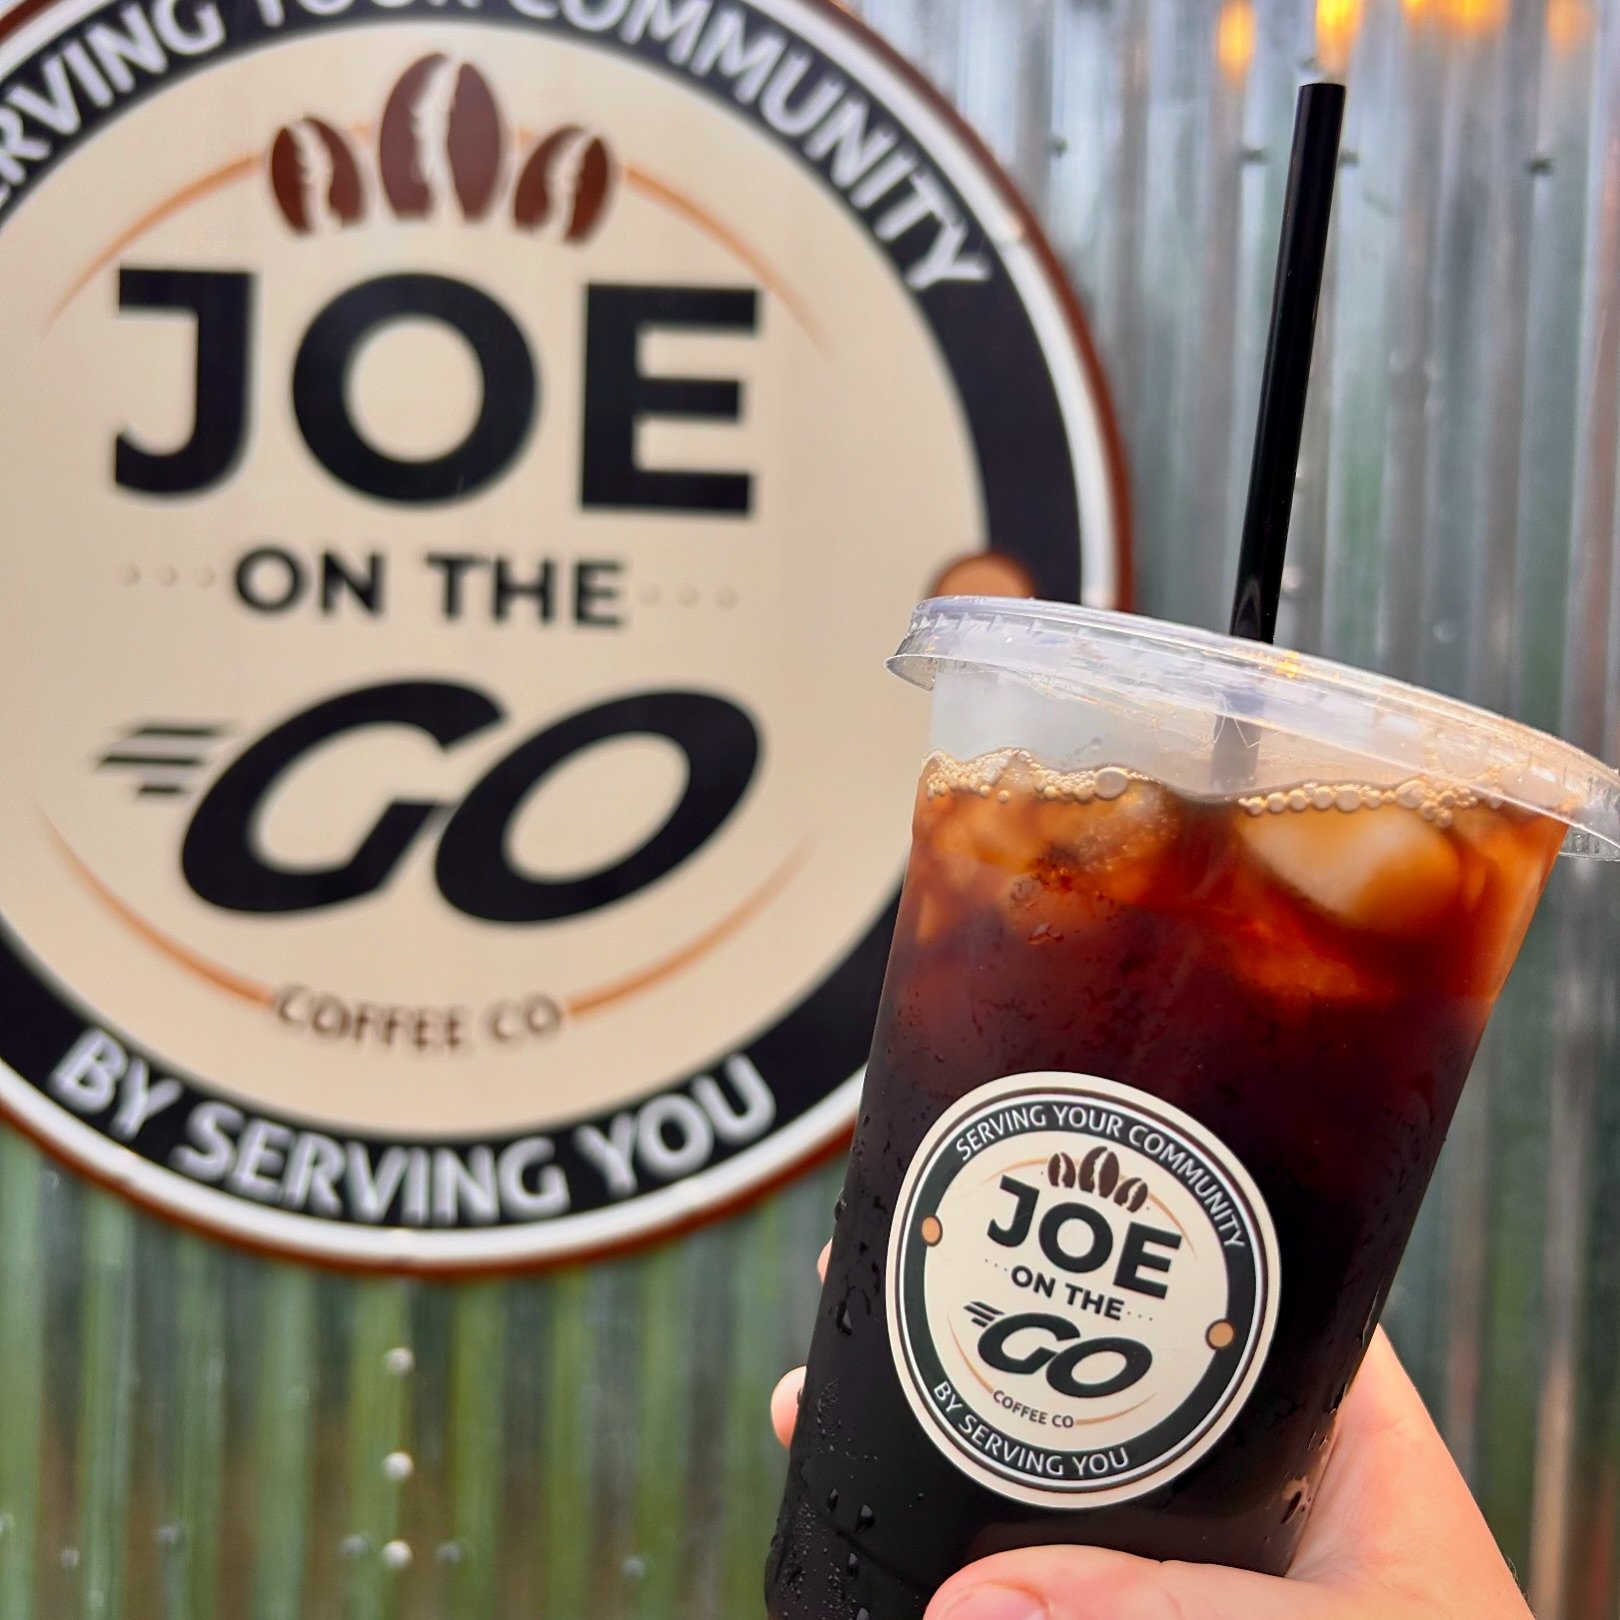 Rainy Wednesday Special!
We&rsquo;re keeping the anniversary party rolling with our delicious iced coffee back on sale for only $2.00 and free flavors! For you tea lovers, you can enjoy a hot tea or London Fog for $2.00 today! 

Sip with you soon!

#